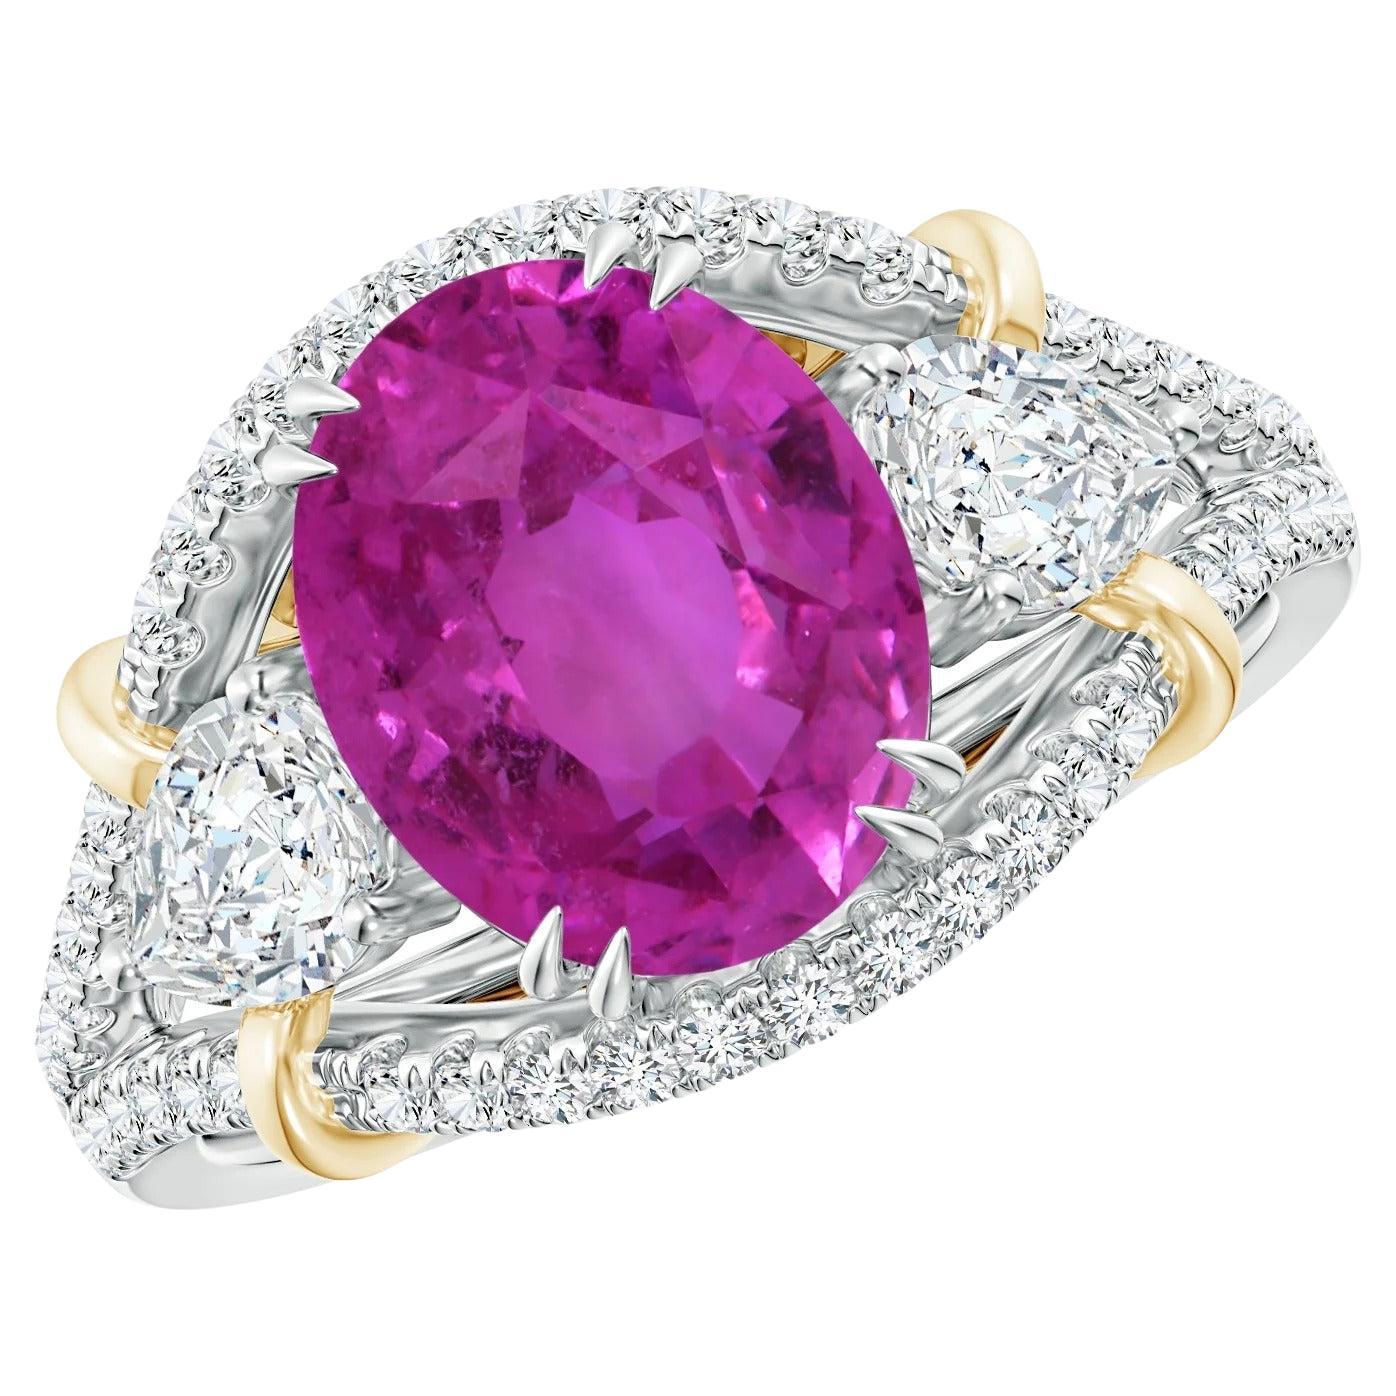 For Sale:  GIA Certified Natural Pink Sapphire Ring in Yellow Gold with Diamonds